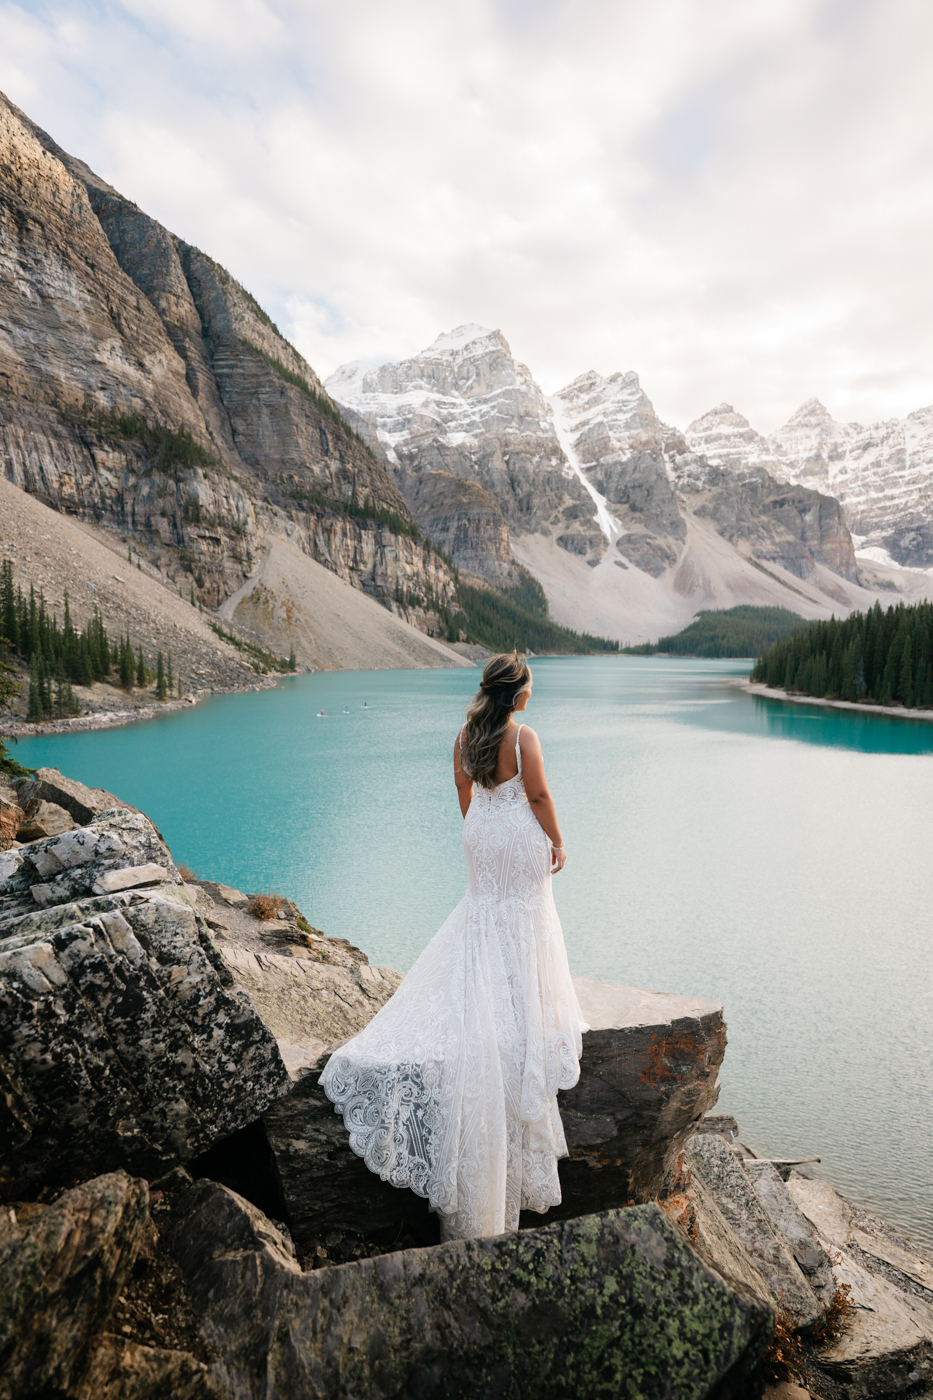 Brides lace dress trails behind her on rocks at Moraine Lake